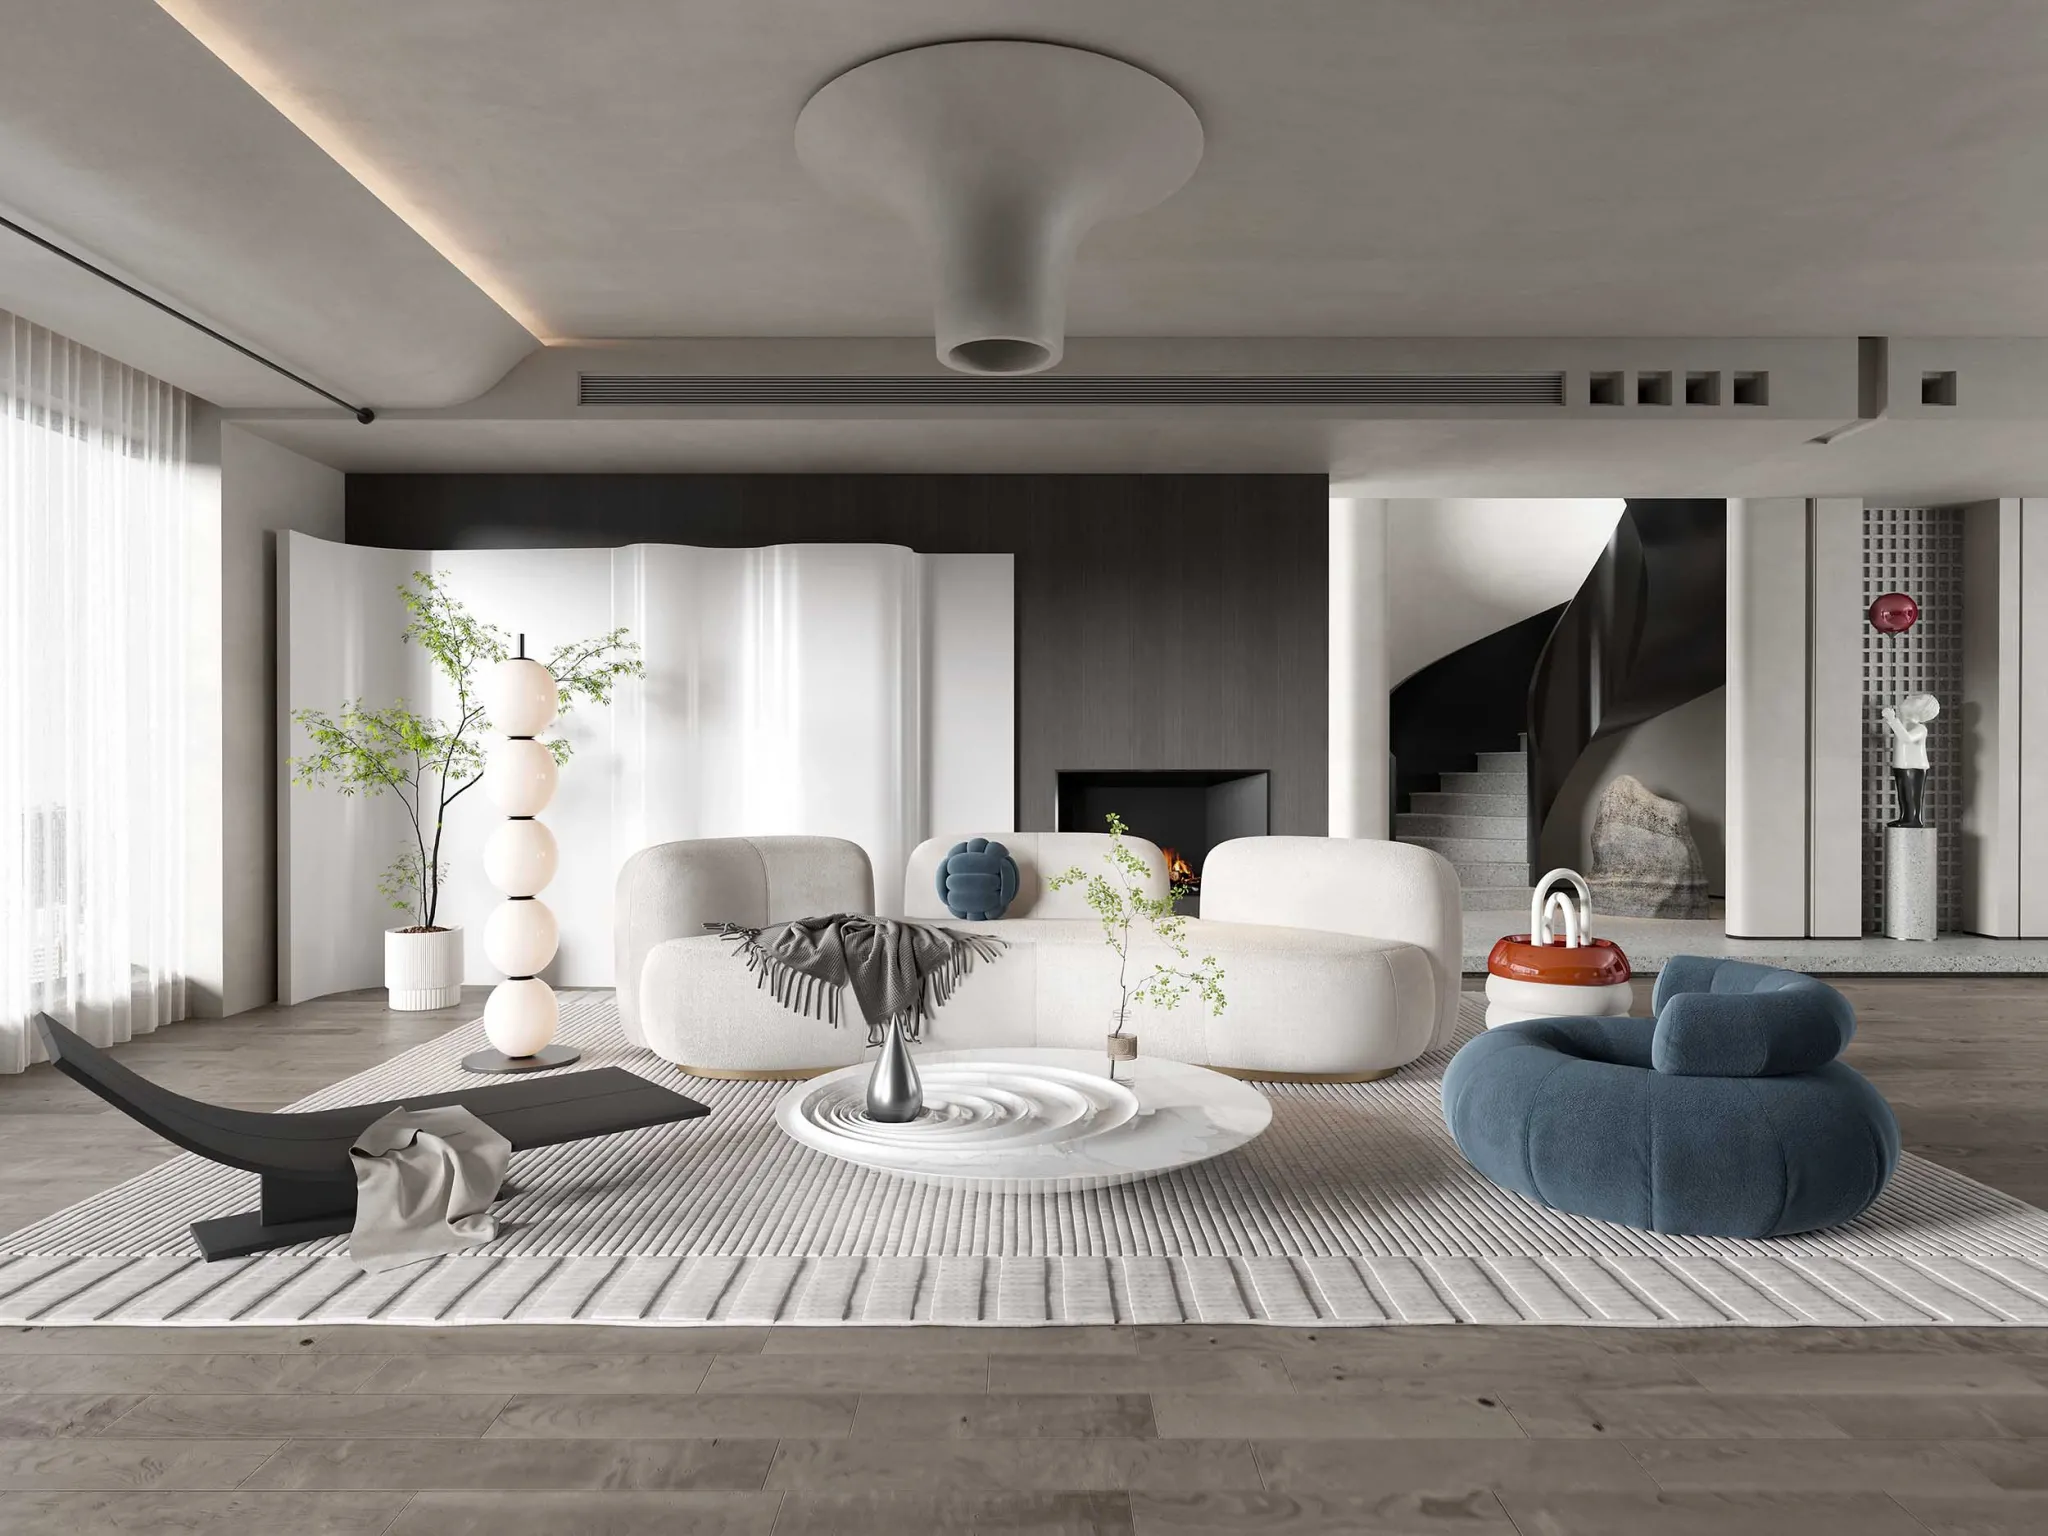 HOUSE SPACE 3D SCENES – LIVING ROOM – 0005